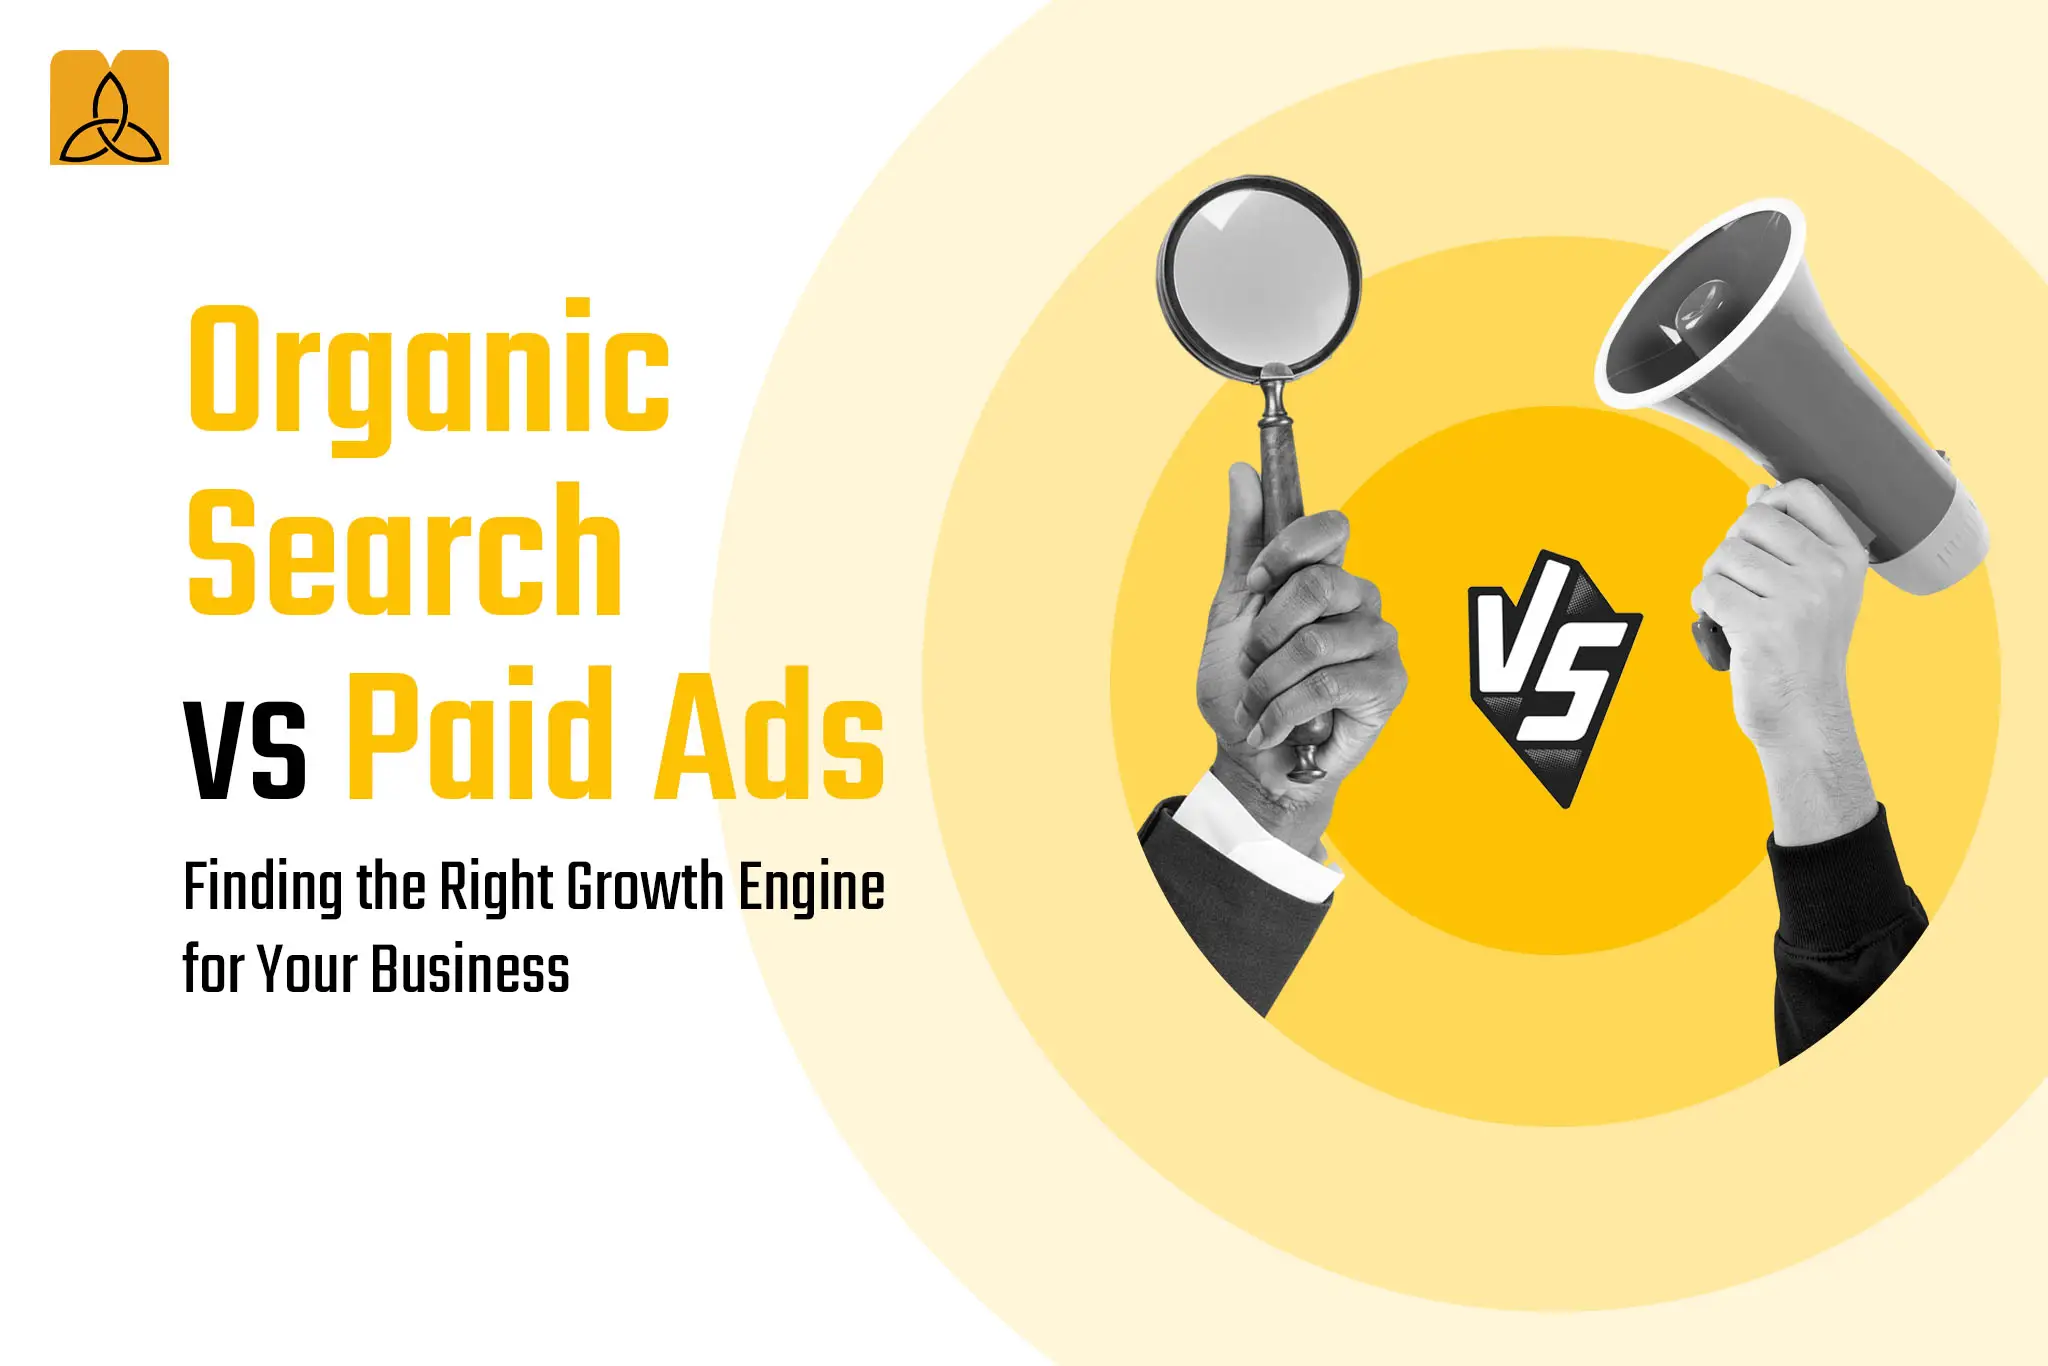 Organic Search vs Paid Ads : Finding the Right Growth Engine for Your Business